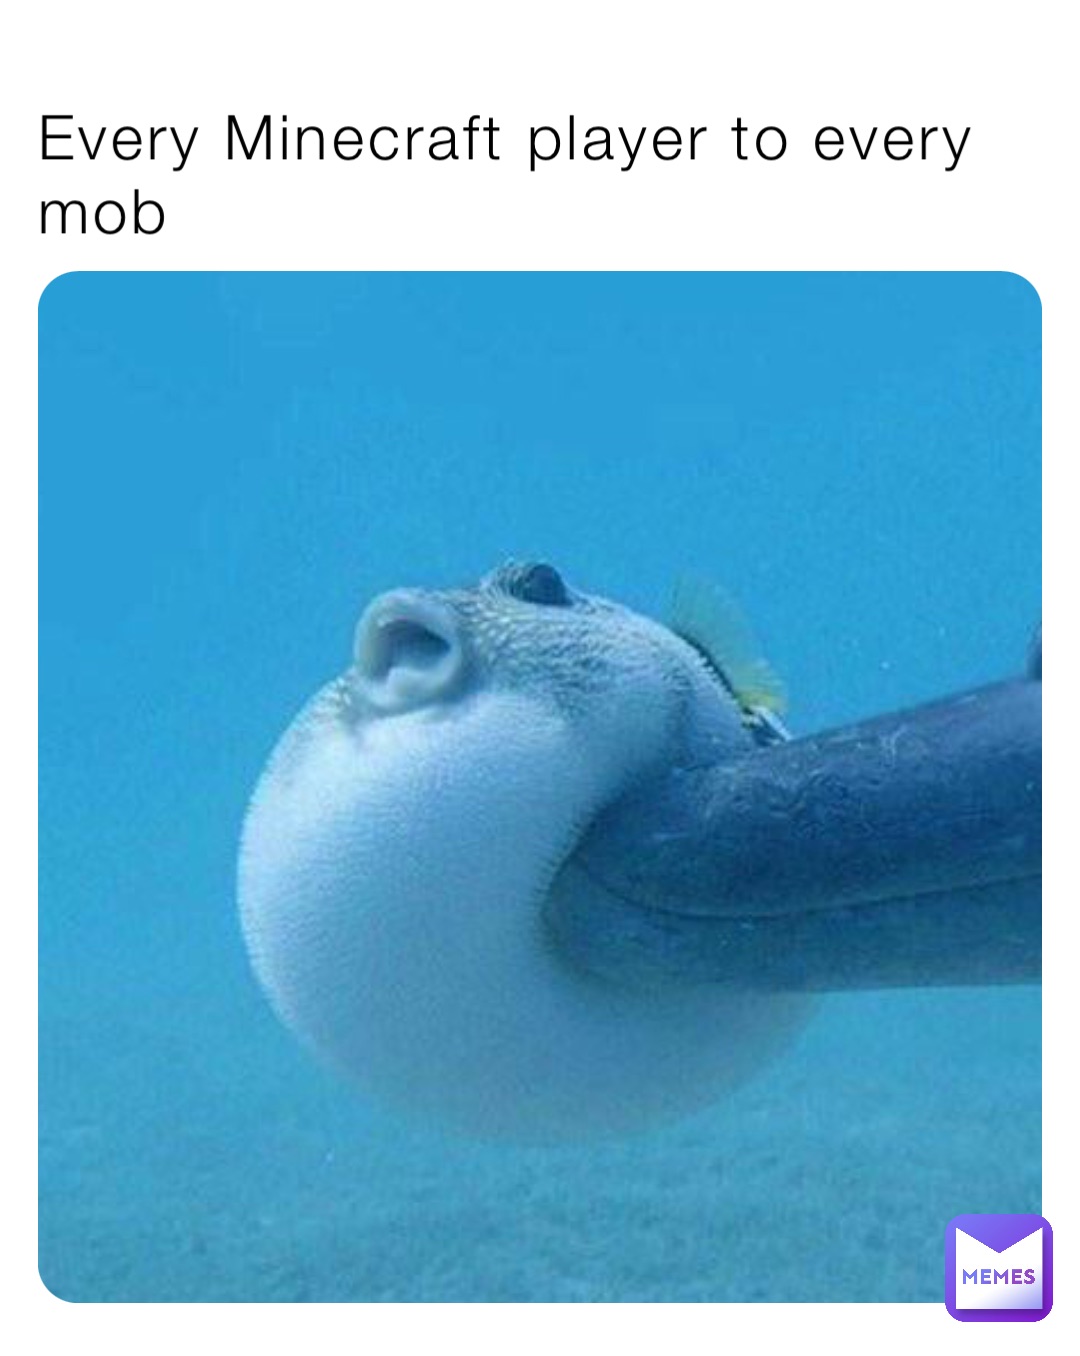 Every Minecraft player to every mob